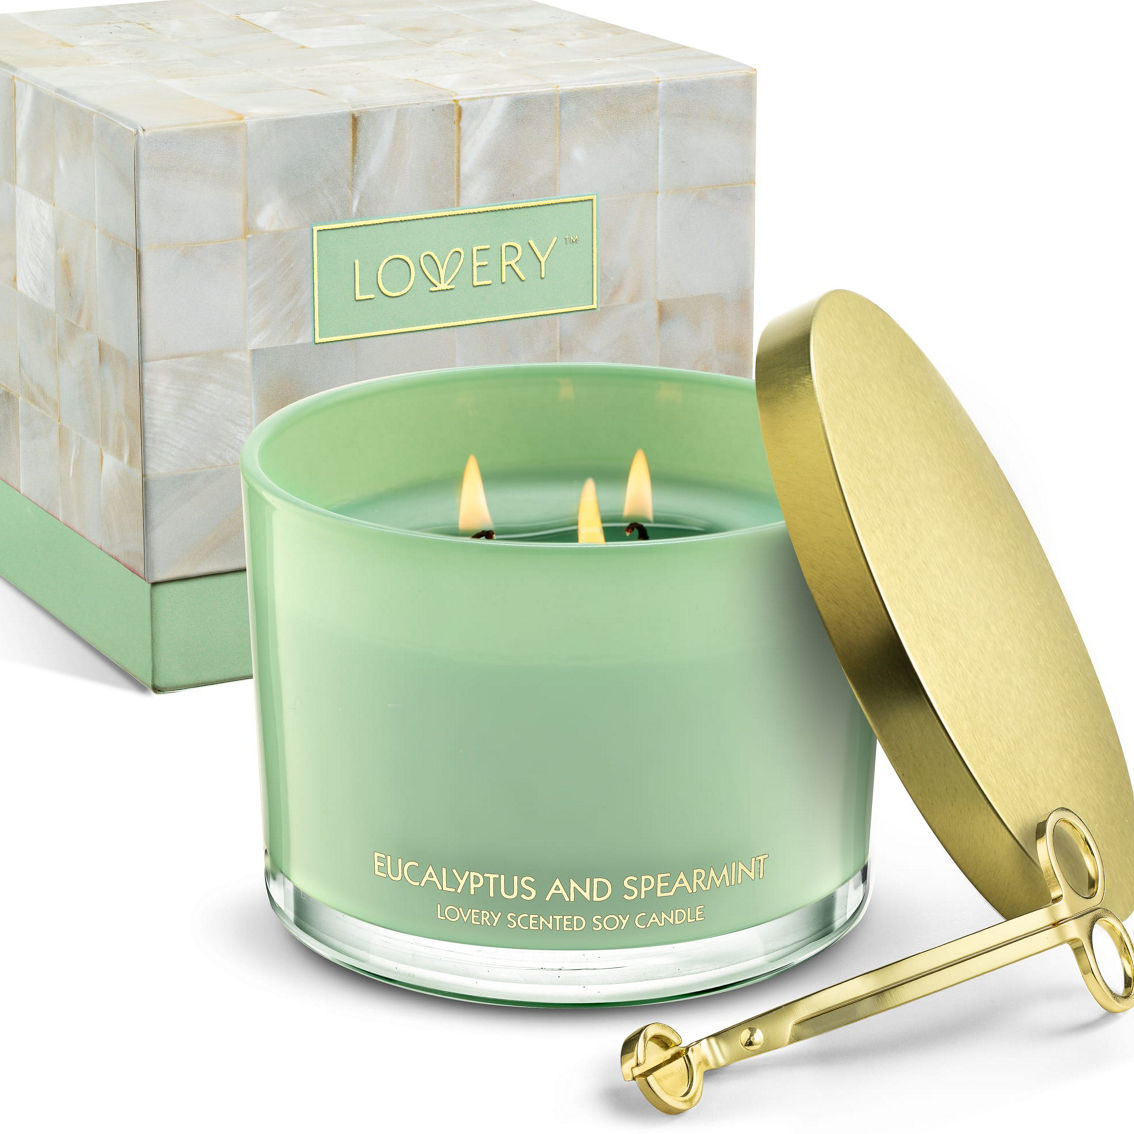 Lovery Eucalyptus & Spearmint Home Candle Gift Set & Wax Trimmer 2-Pc. Soy Candles - Image 5 of 5